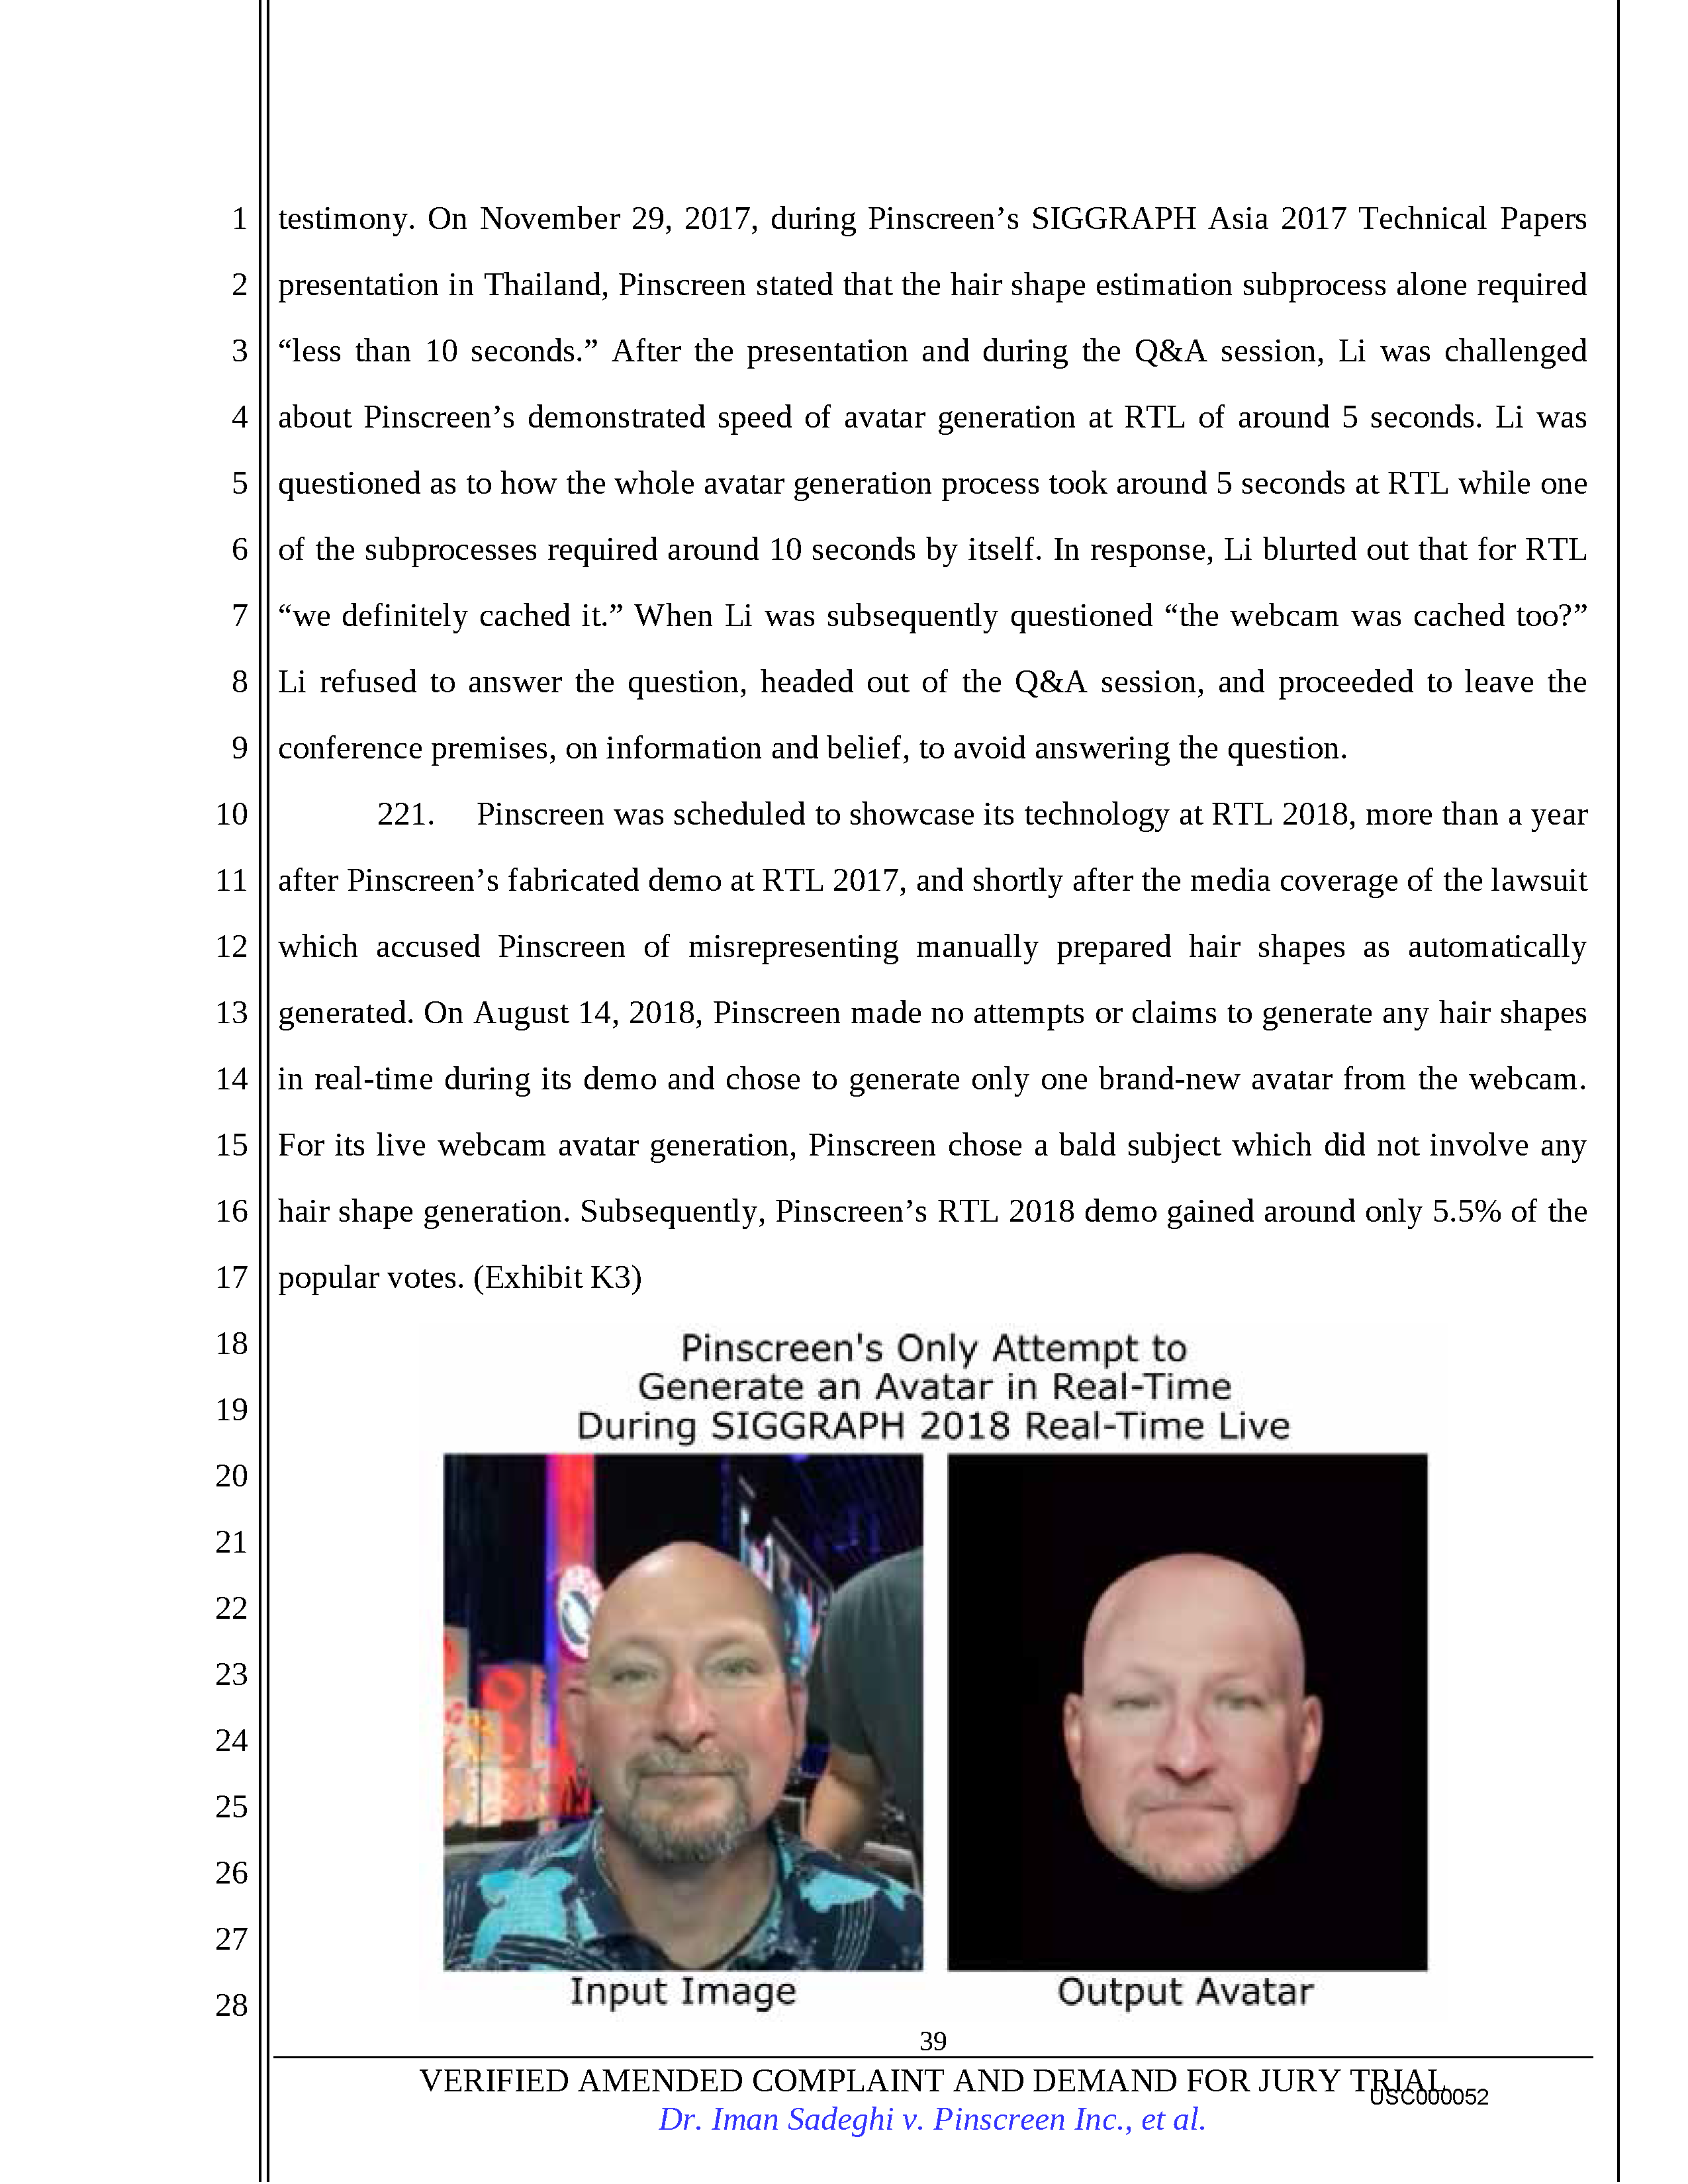 USC's Investigation Report re Hao Li's and Pinscreen's Scientific Misconduct at ACM SIGGRAPH RTL 2017 - Full Report Page 54